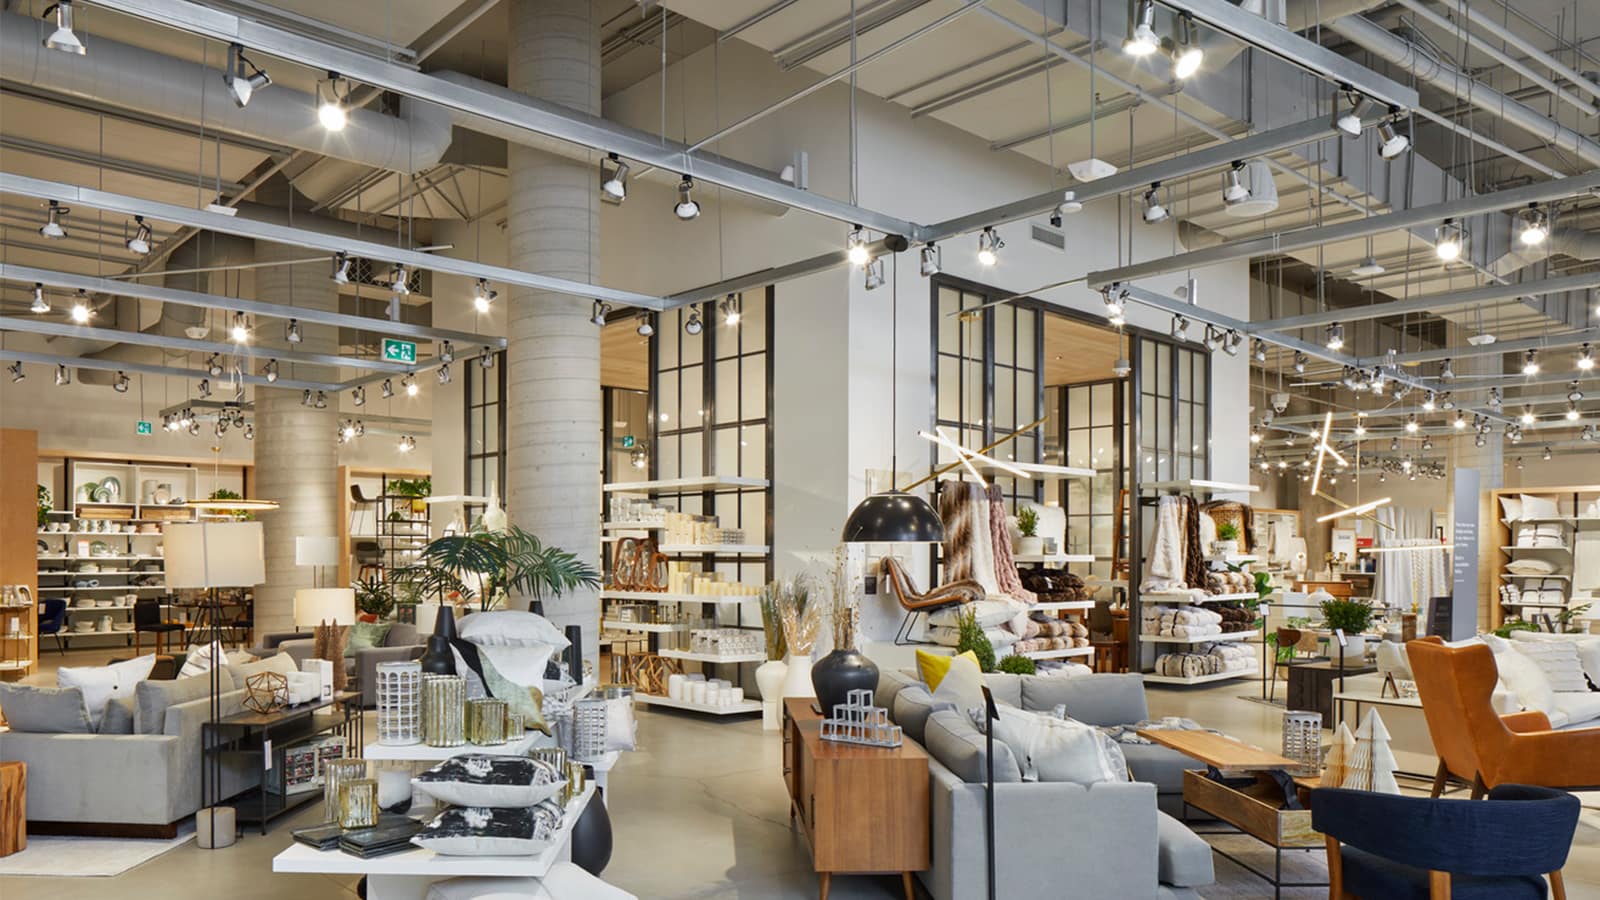 The West Elm store in Toronto